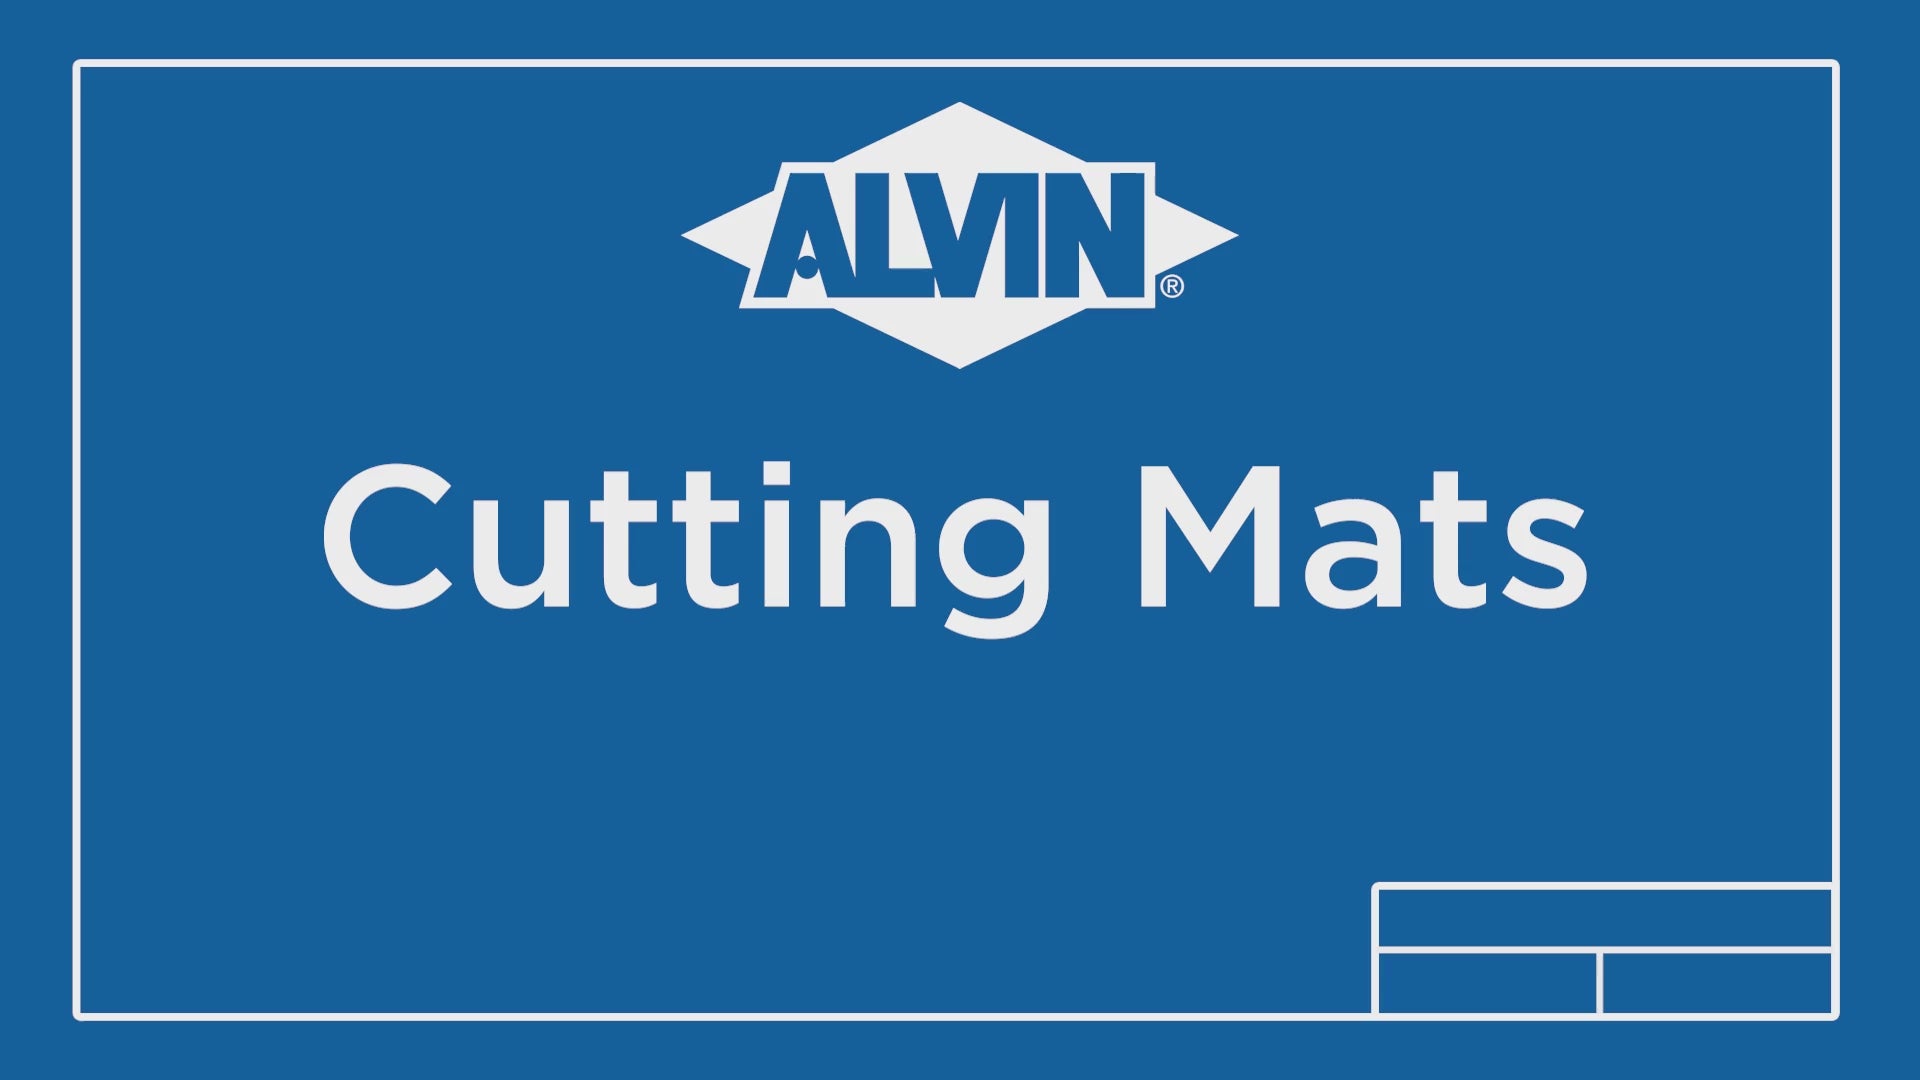 Alvin Self Healing Cutting Mat Worth It? (Watch This Before Buying) 